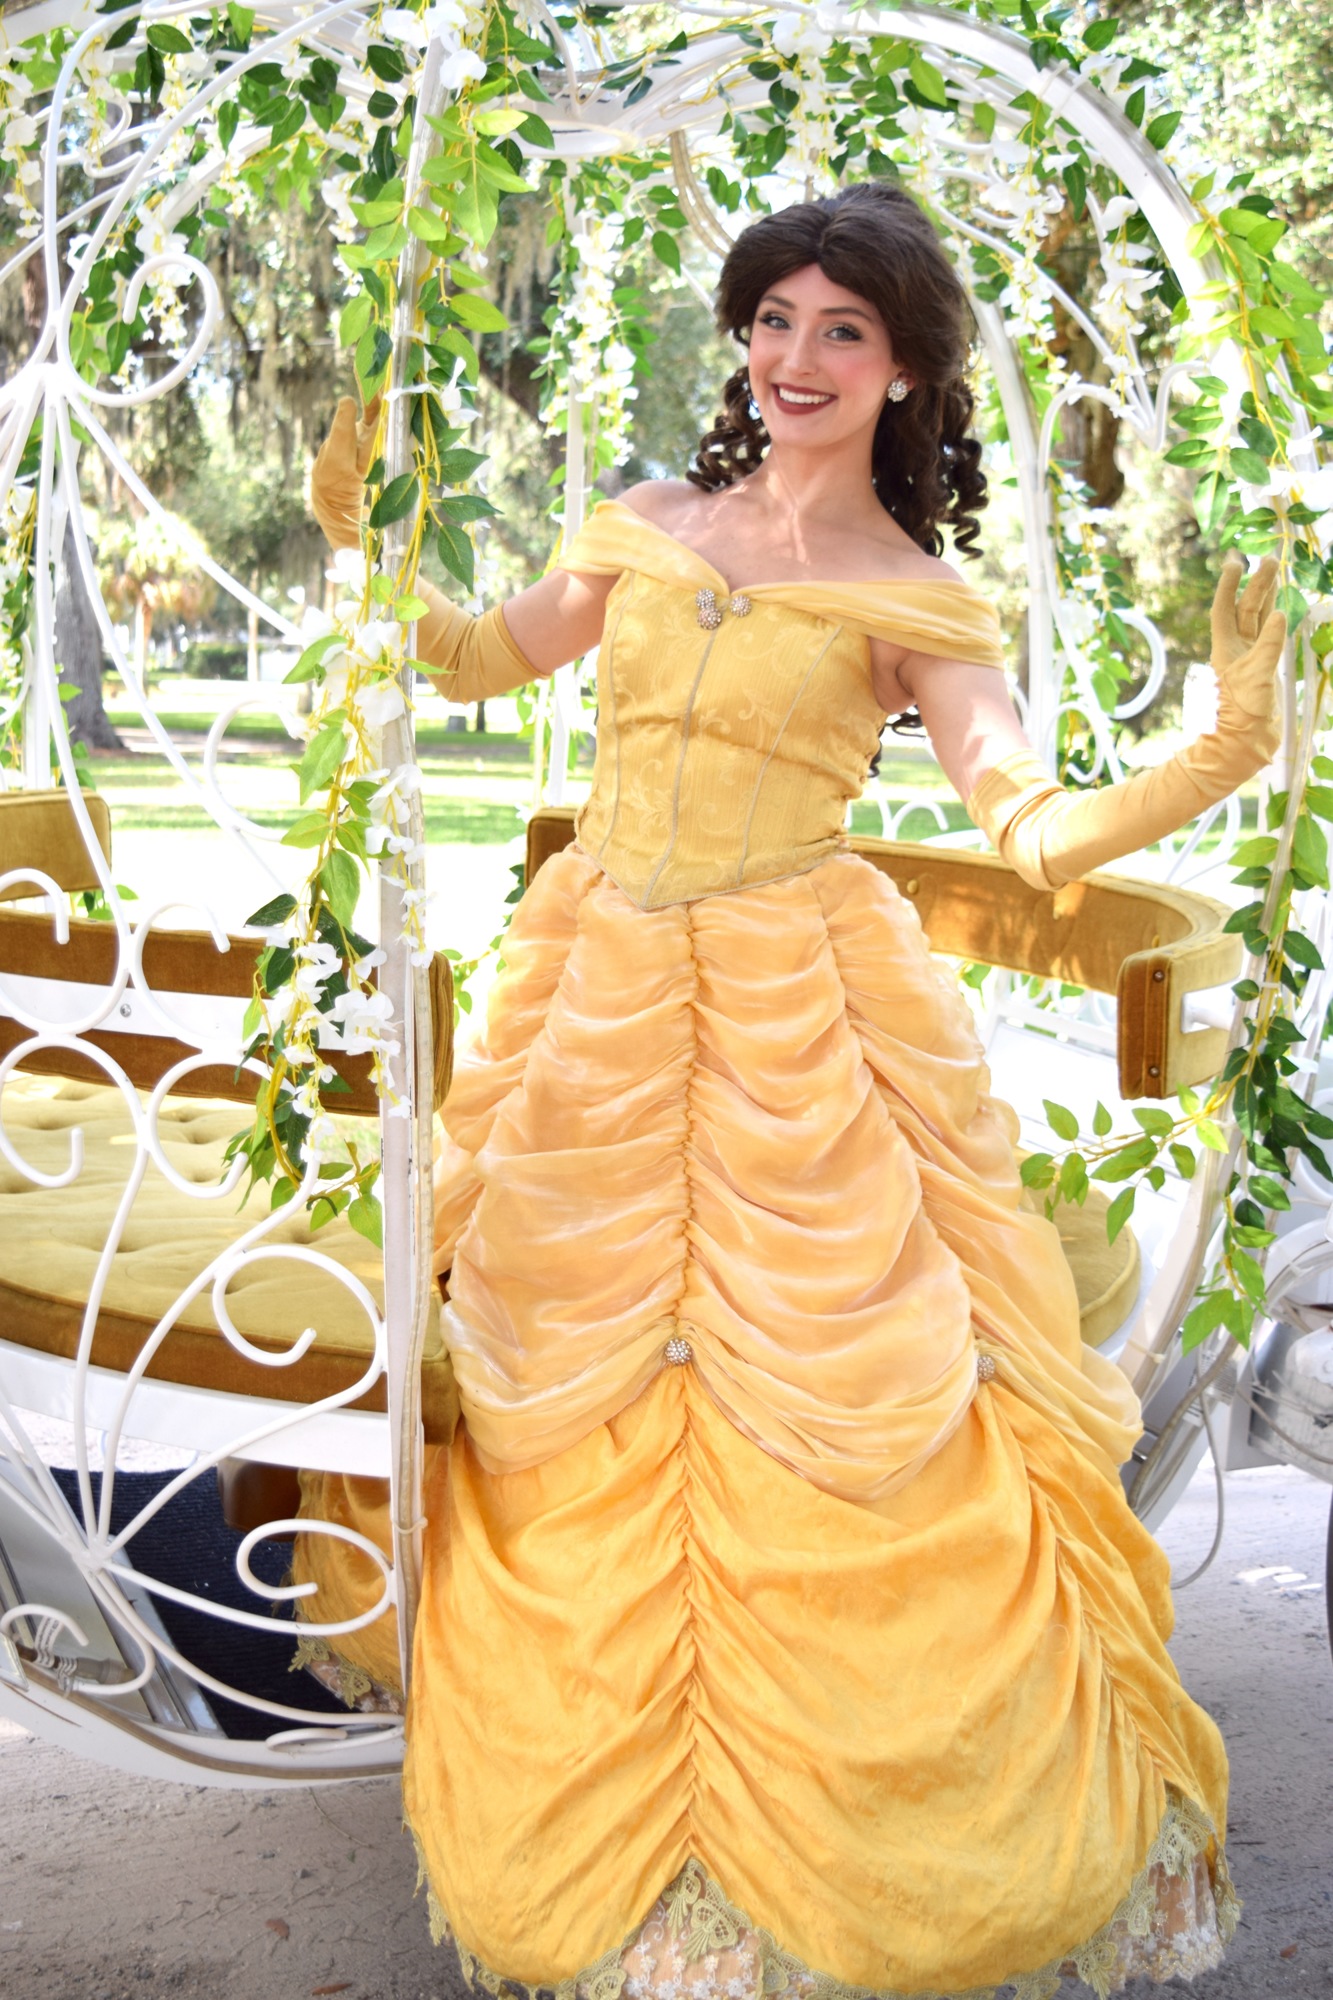 A princess from Ever After Character Events rode through Oakland with Nastasi in mid-May.